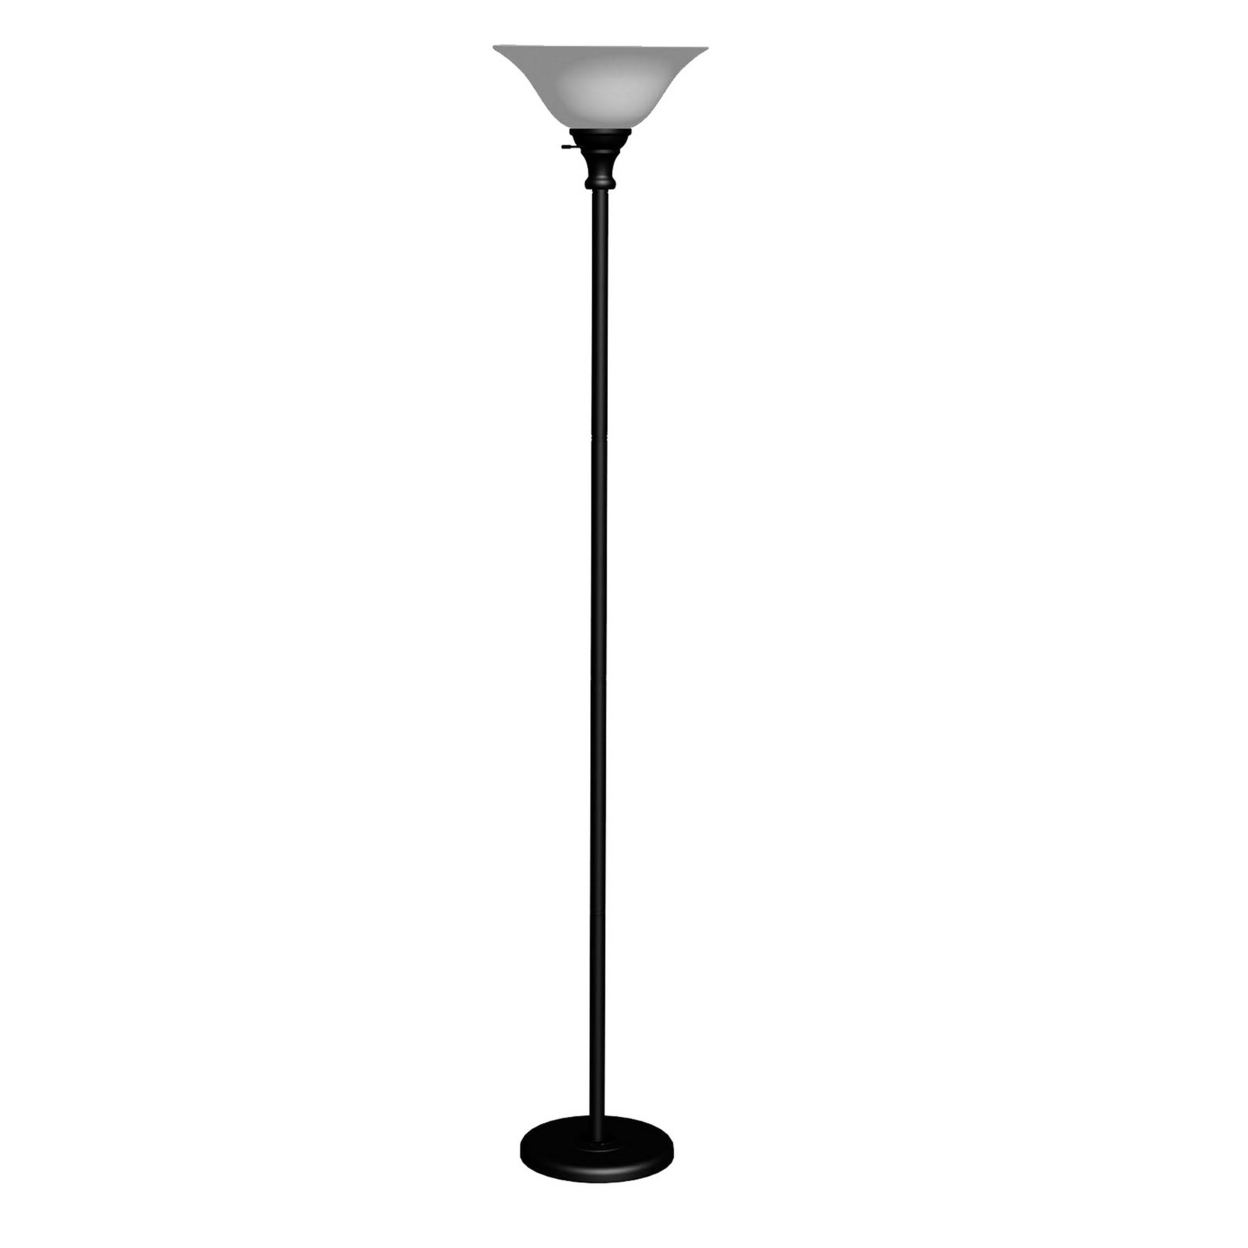 70 Inch Metal 3 Way Torchiere Floor Lamp, Frosted Glass, Black And White- Saltoro Sherpi